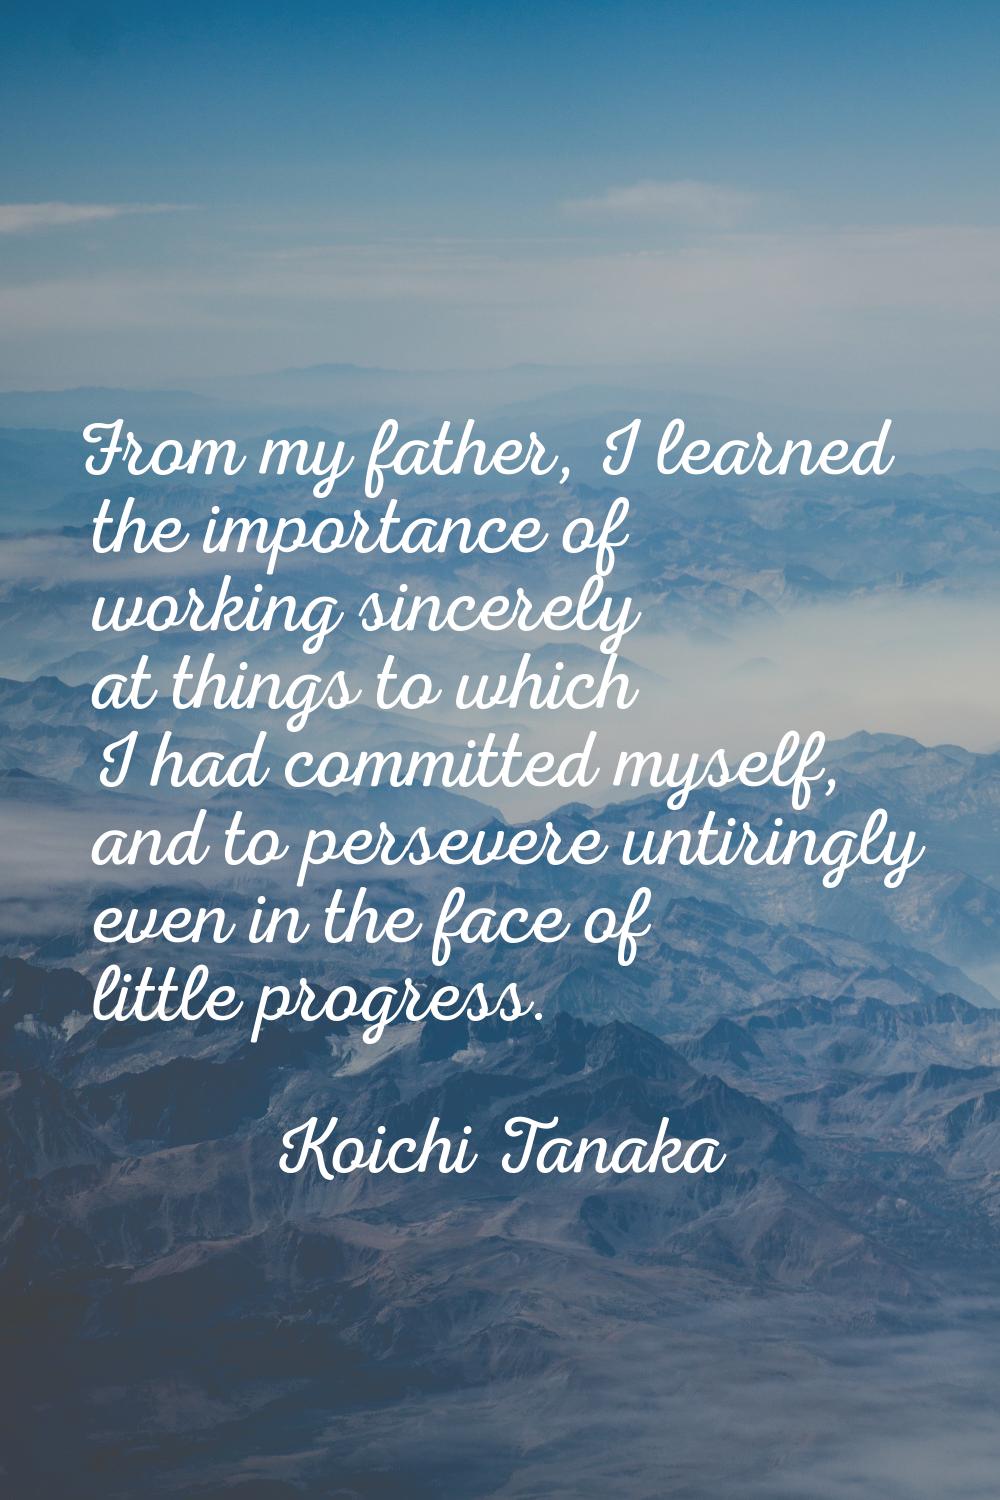 From my father, I learned the importance of working sincerely at things to which I had committed my